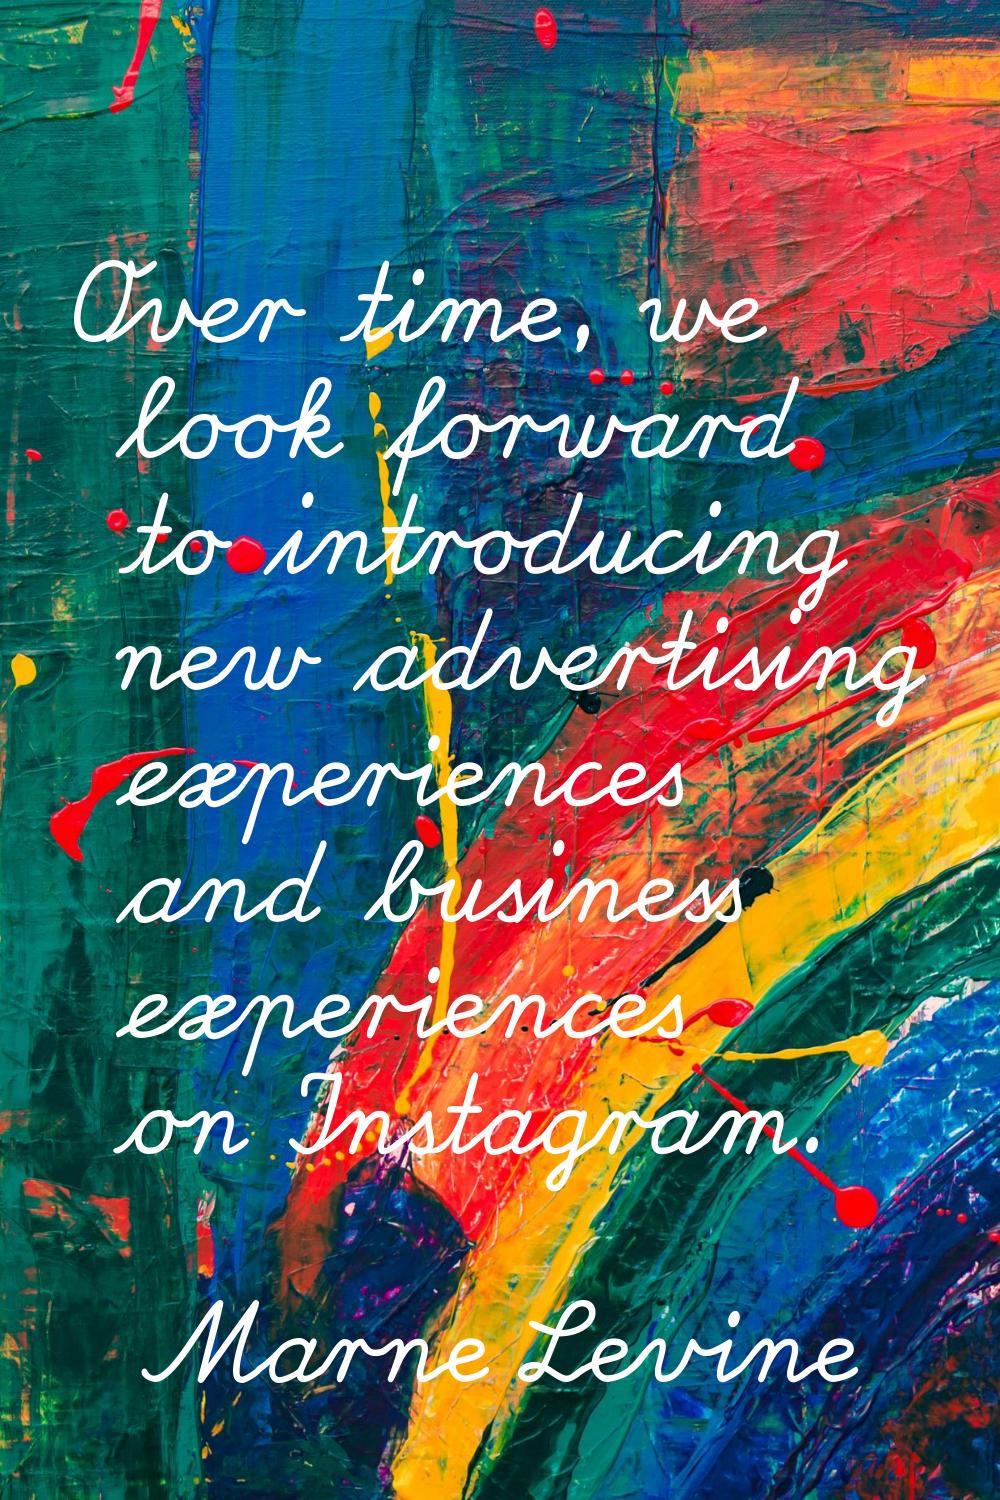 Over time, we look forward to introducing new advertising experiences and business experiences on I